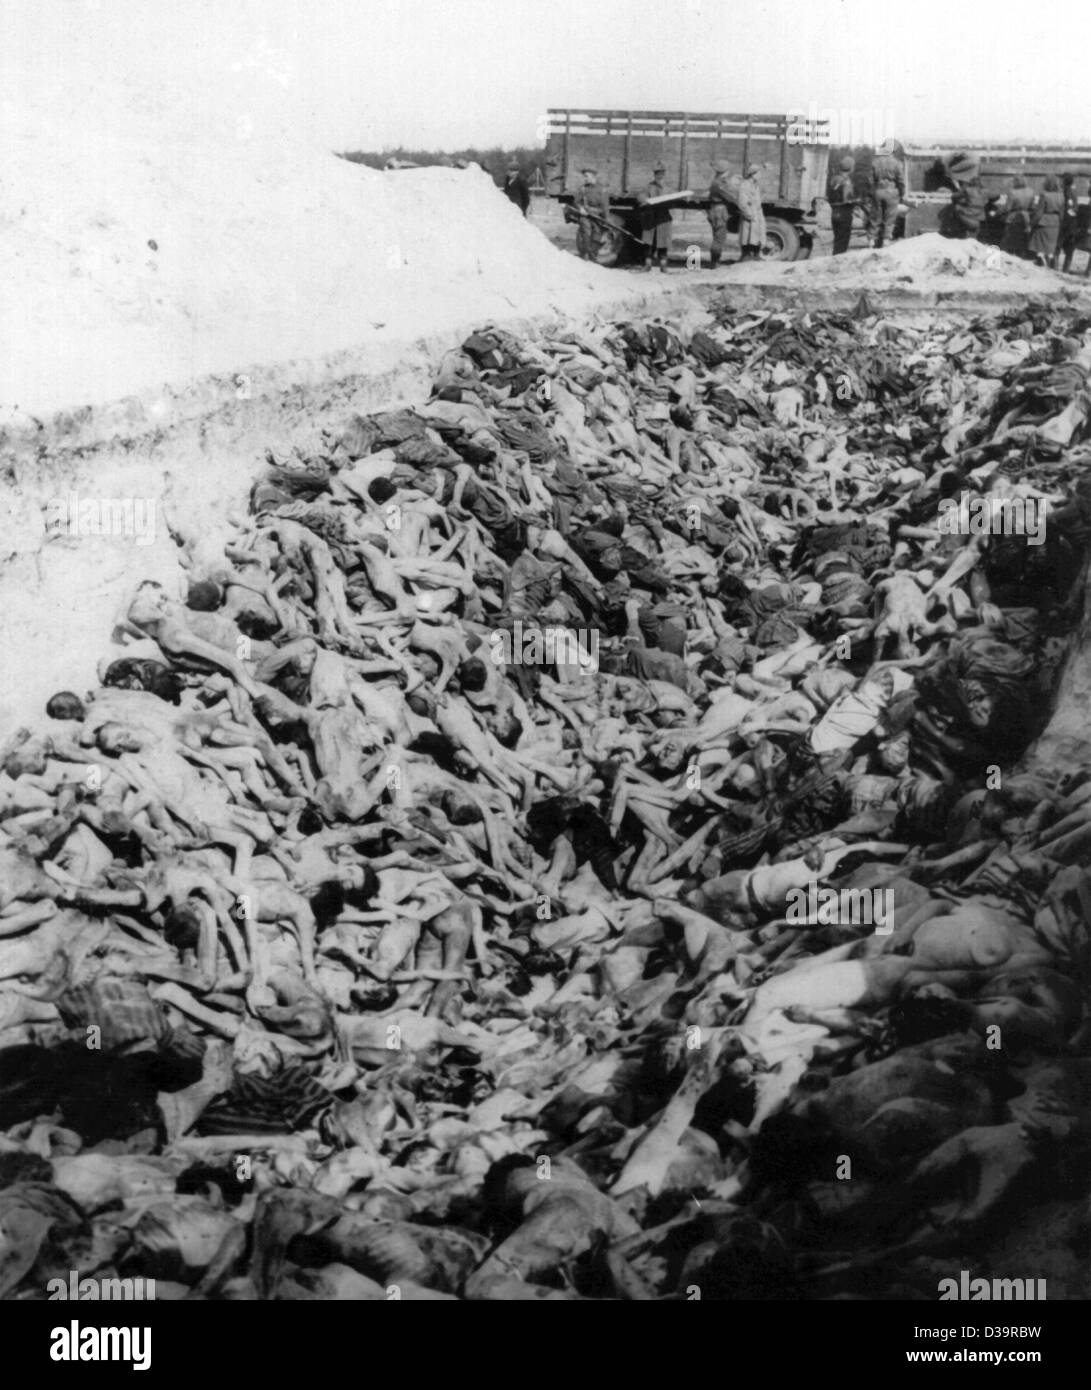 (dpa files) -  The bodies of hundreds of prisoners who were killed or died of hunger or contagion are lying in a mass grave at the former Nazi concentration camp Bergen-Belsen near Celle, Germany (undated). More than 60,000 people lost their lives in the camp during the Third Reich. Stock Photo